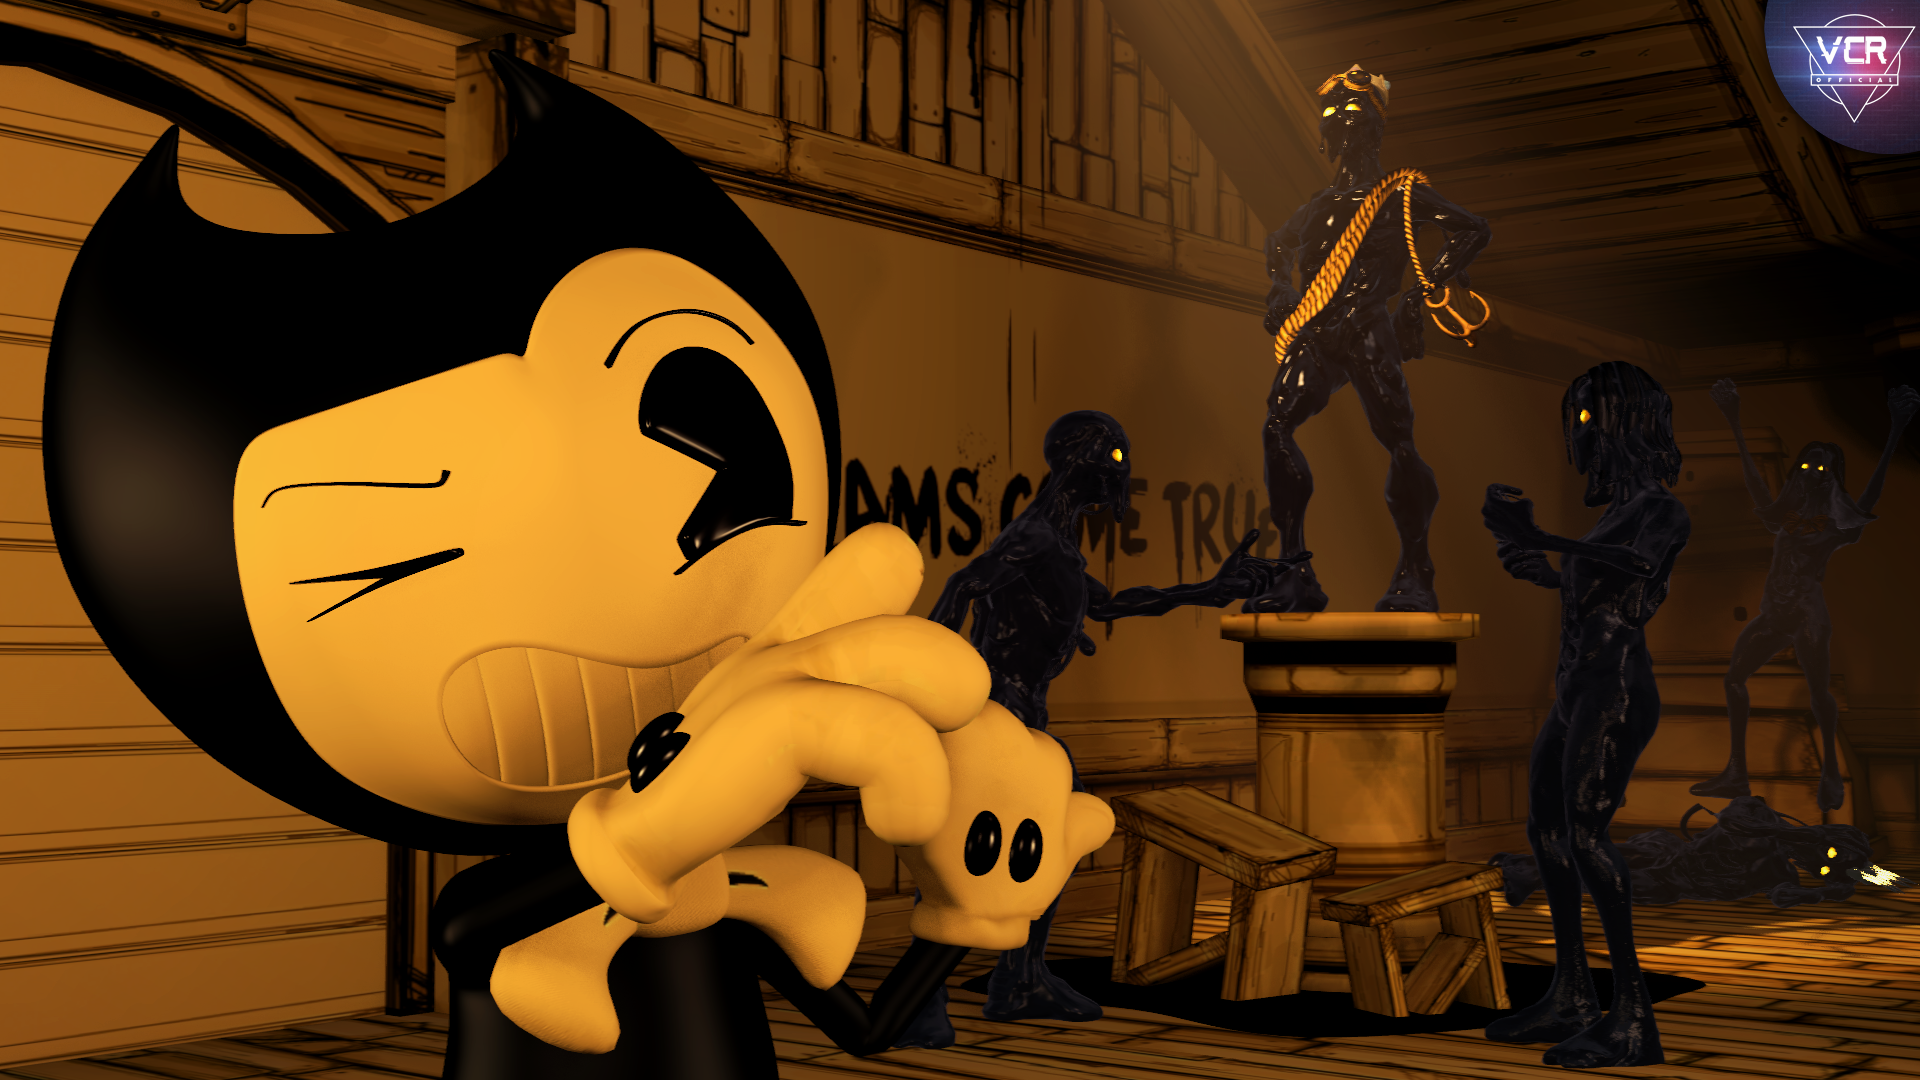 Blender/BATIM AU) Bendy and the Demon Within by Roux36Arts on DeviantArt